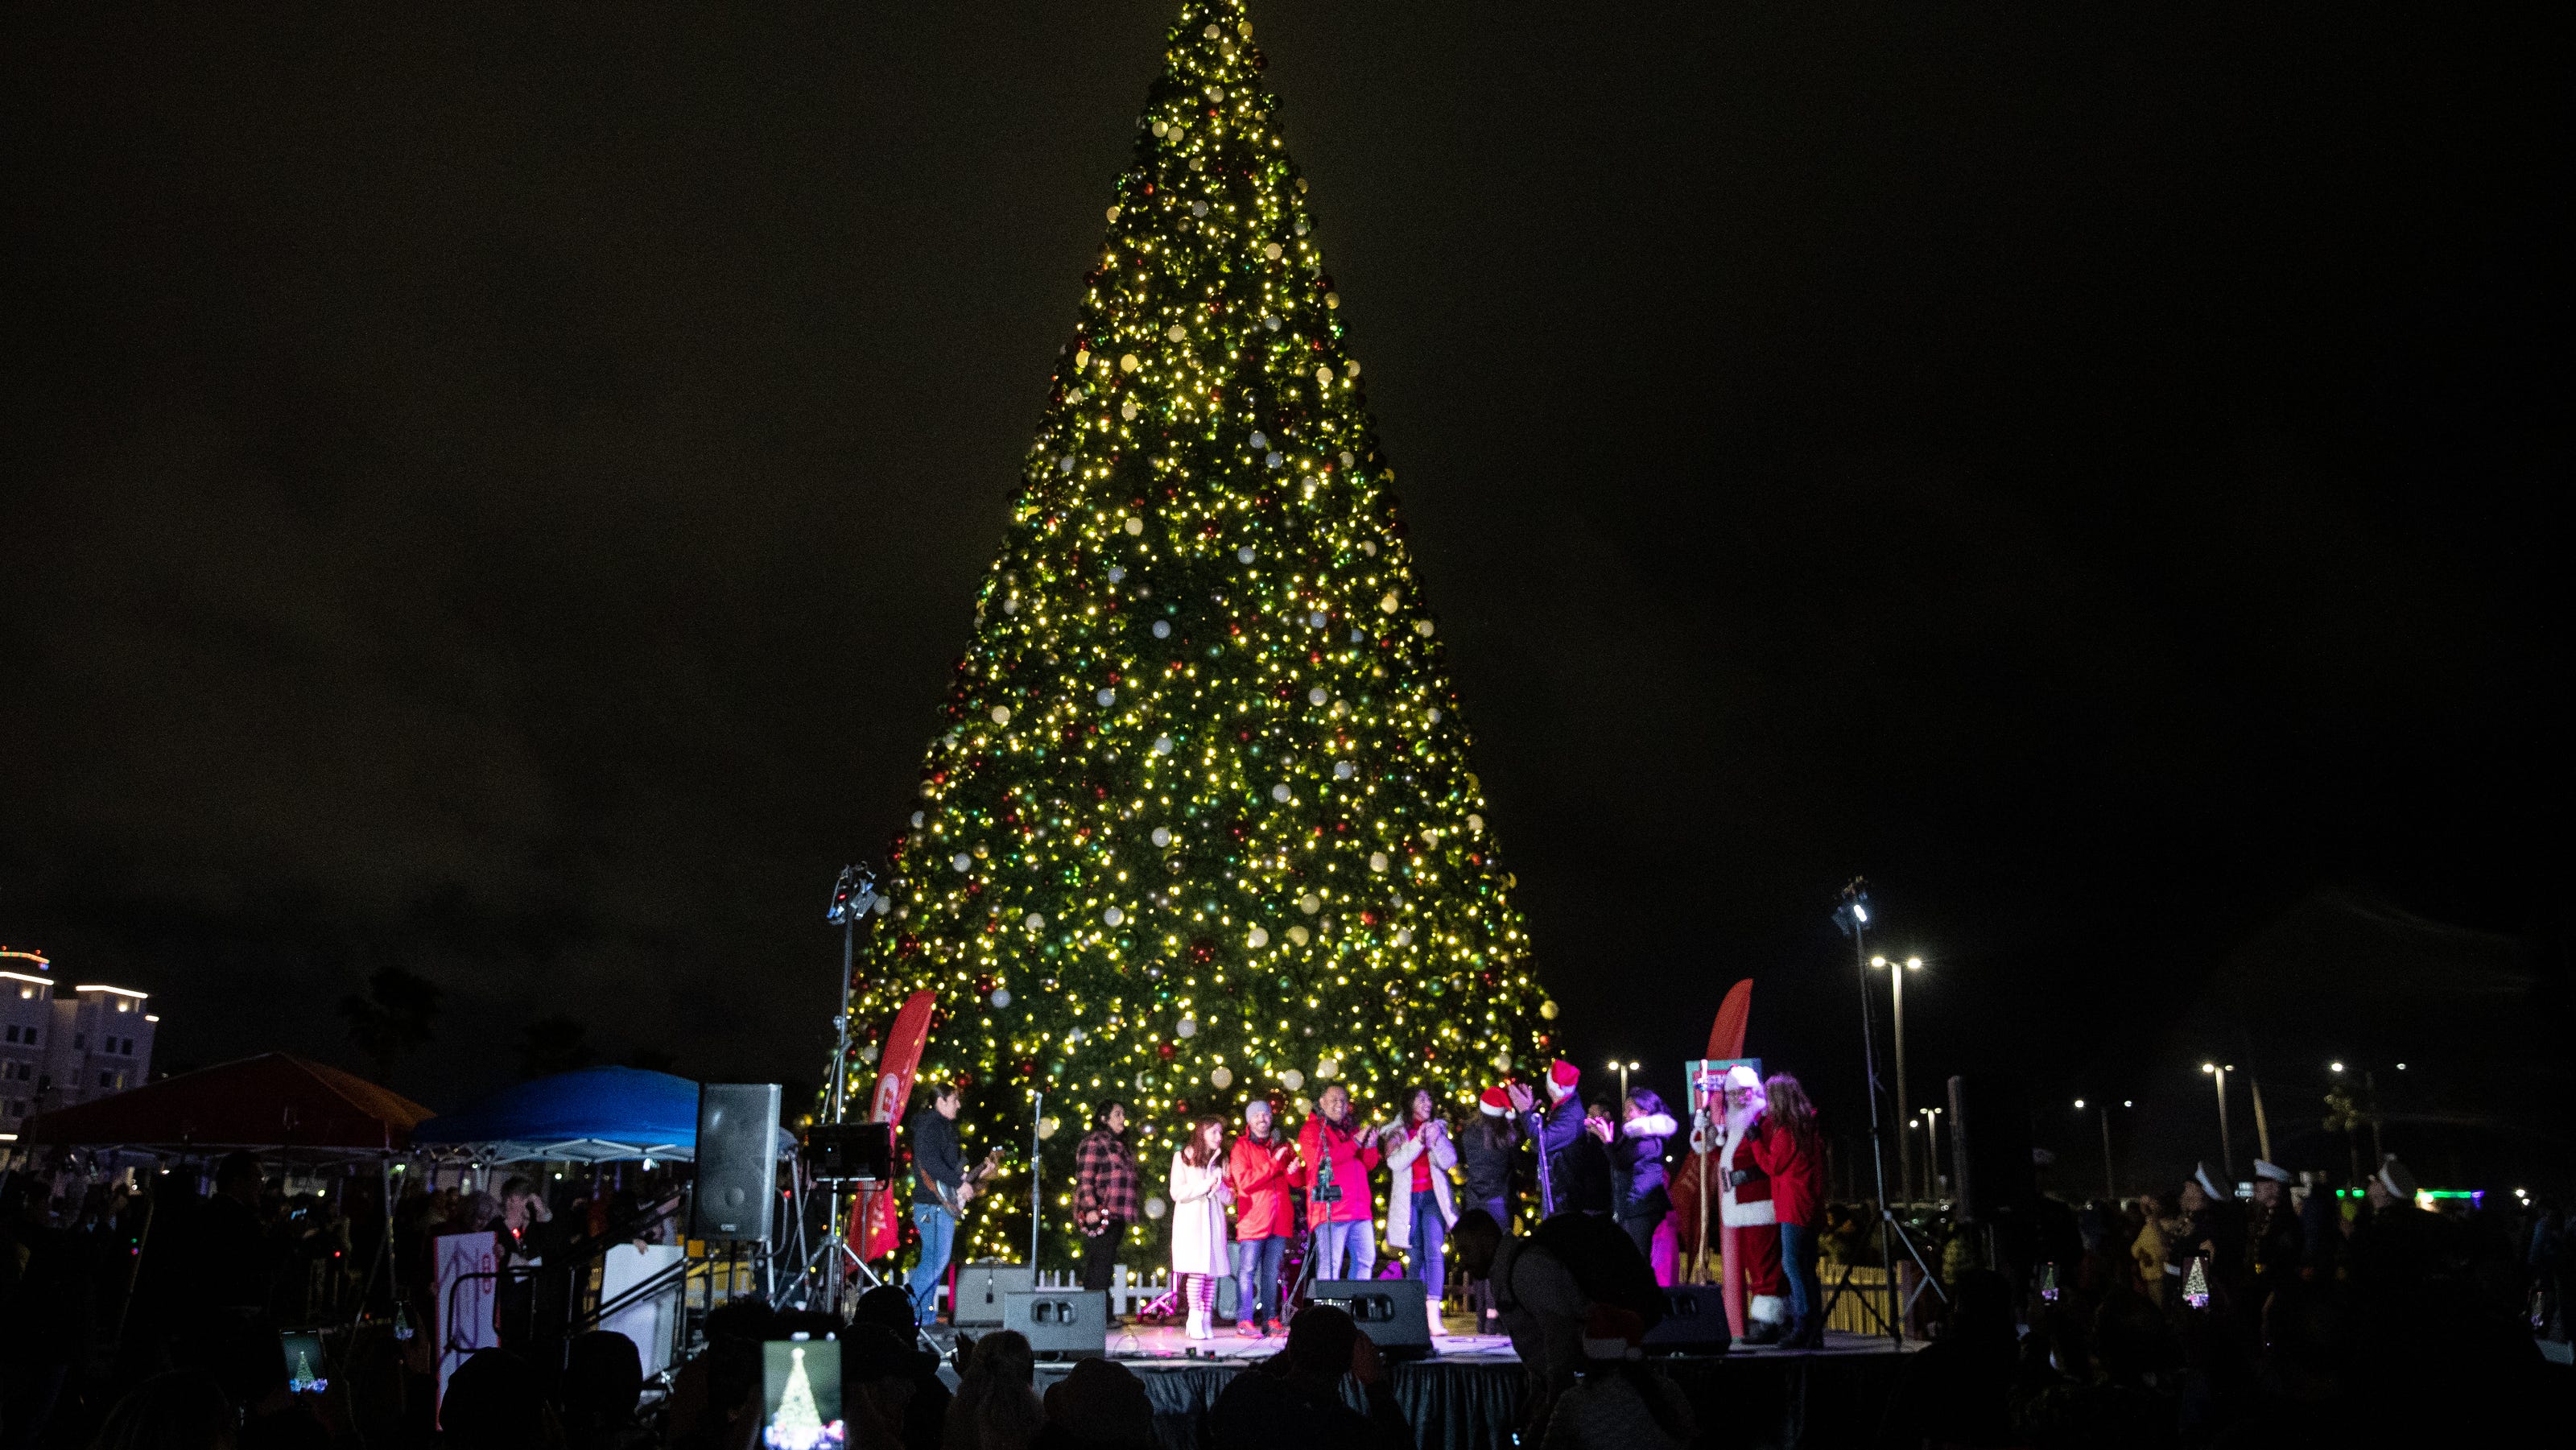 Find a fun family event during the 2022 holidays in Corpus Christi